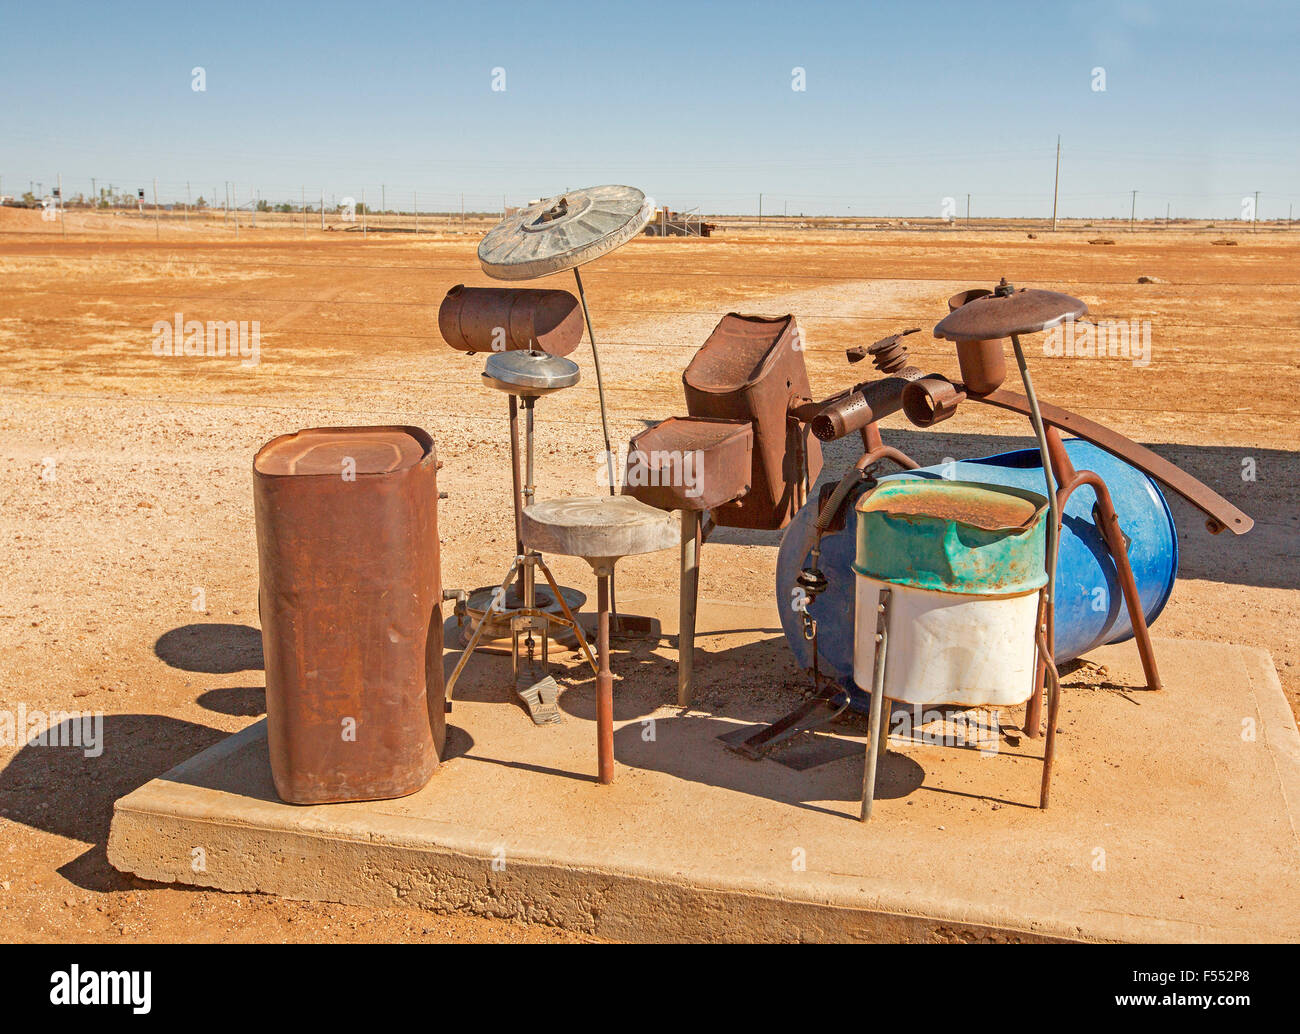 Drum kit made from recycled rubbish at musical fence, a popular tourist attraction at Winton in outback Australia Stock Photo